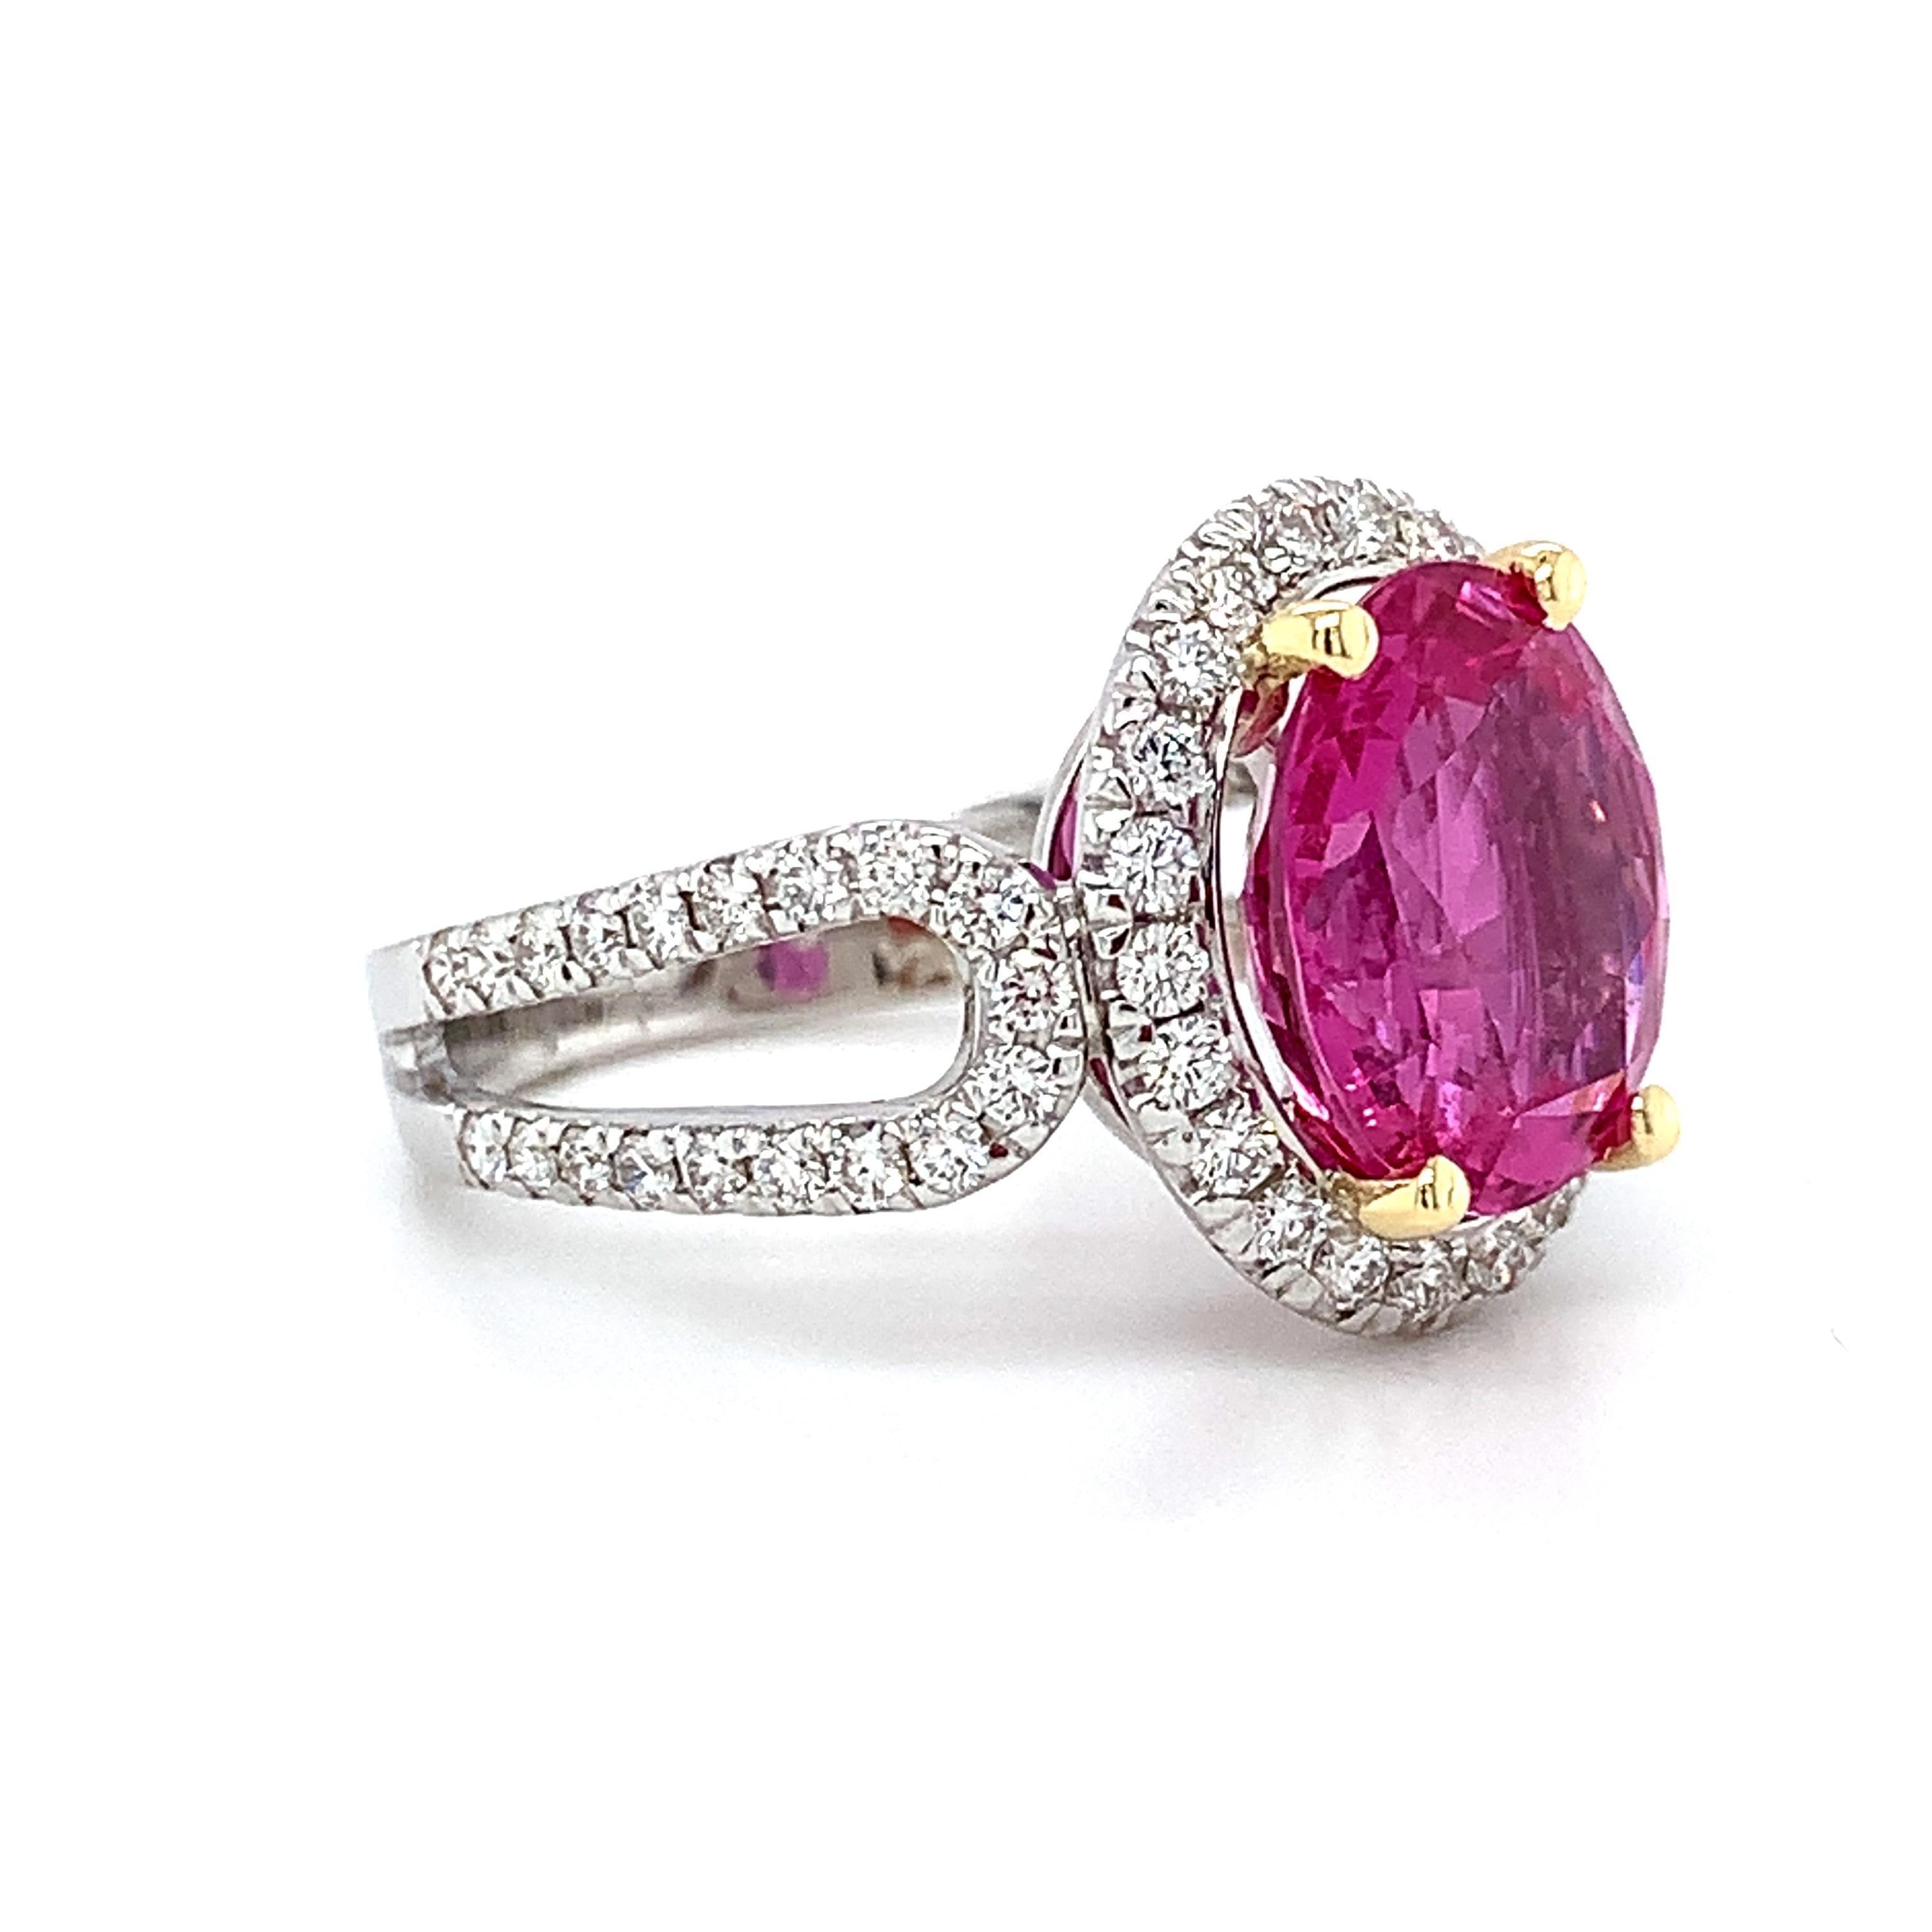 Women's or Men's GIA Certified Unheated 5.73 Carat Pink Sapphire and Diamond Cocktail Ring For Sale